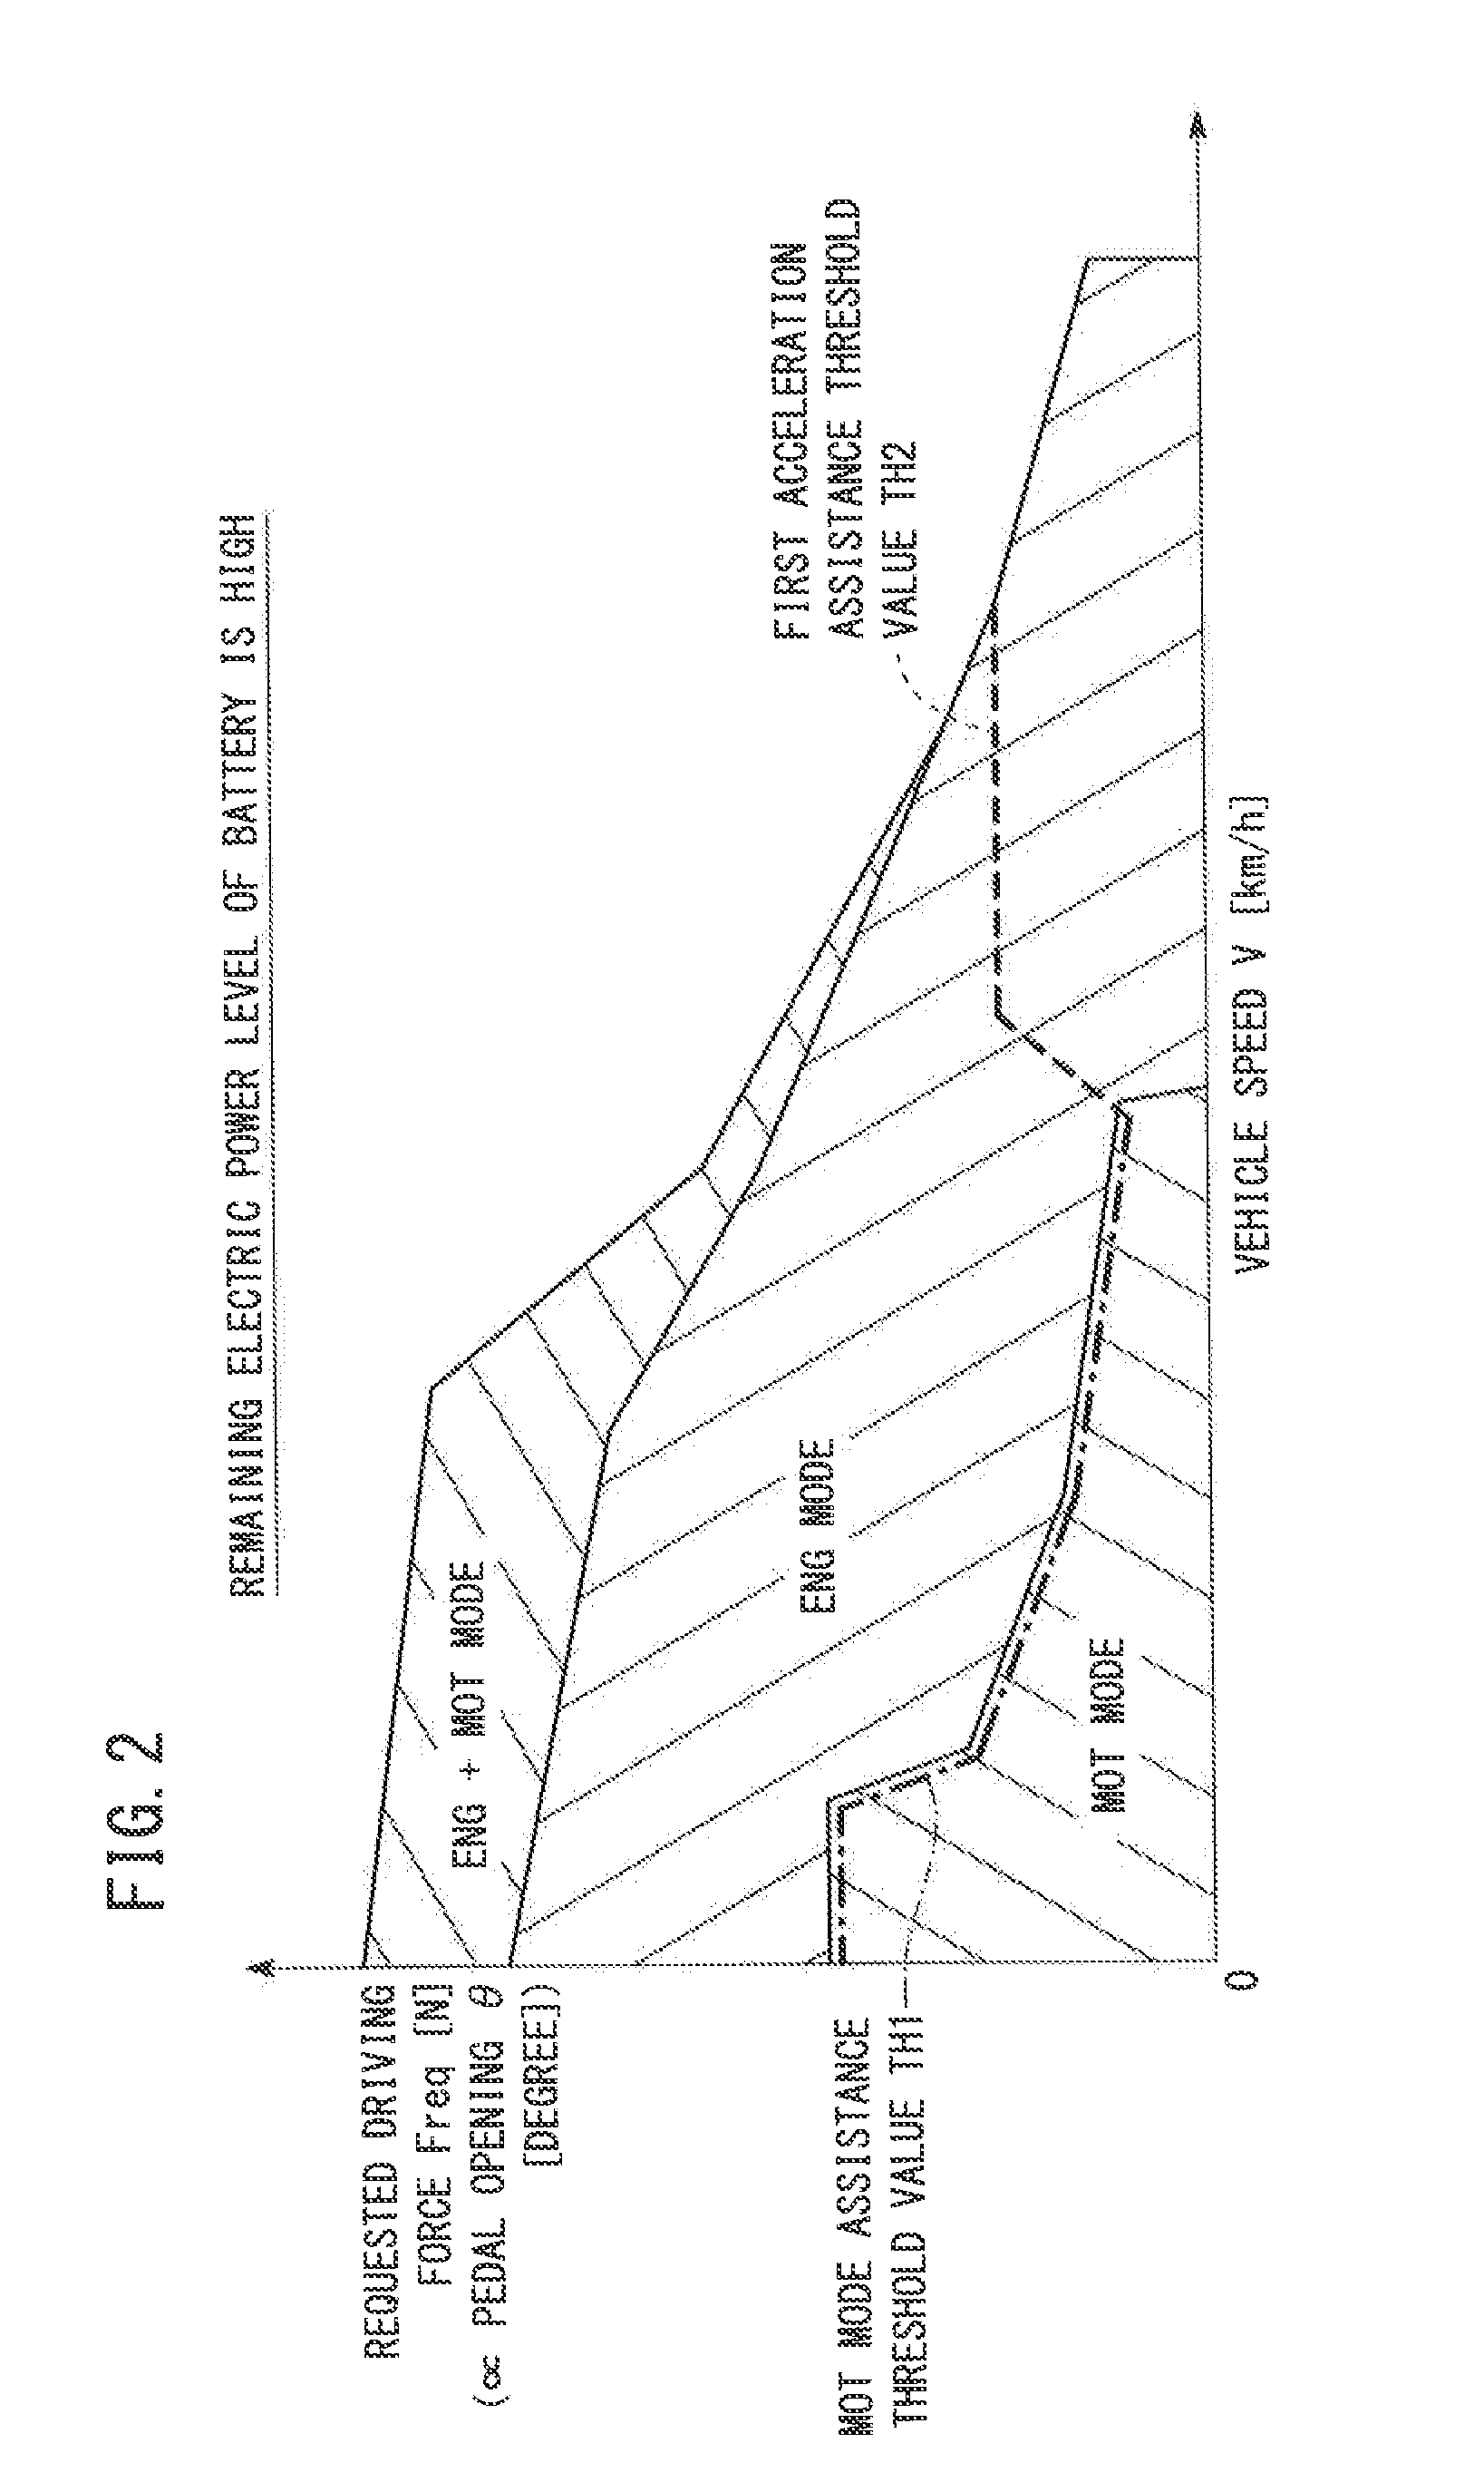 Accelerator-pedal-counterforce control device and vehicle